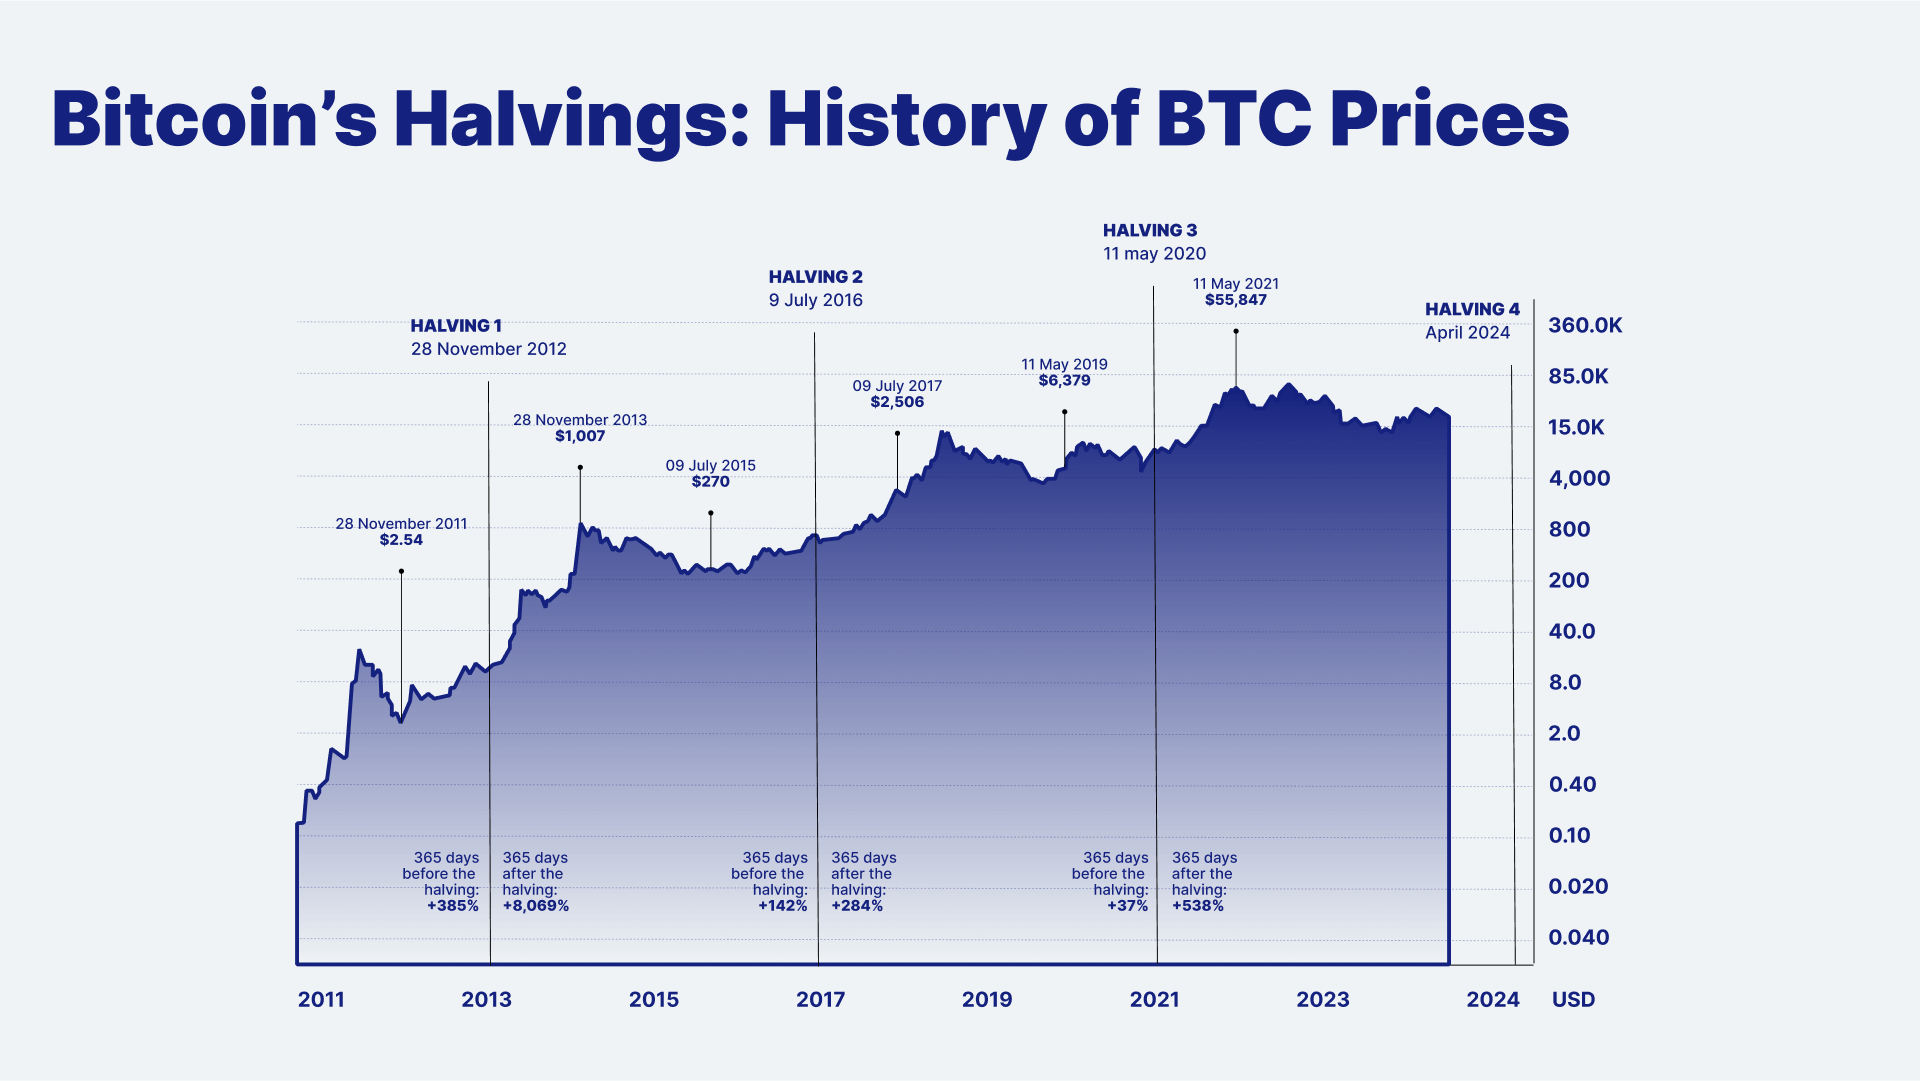 What Is Bitcoin Halving? Here's Everything You Need to Know About BTC Halving